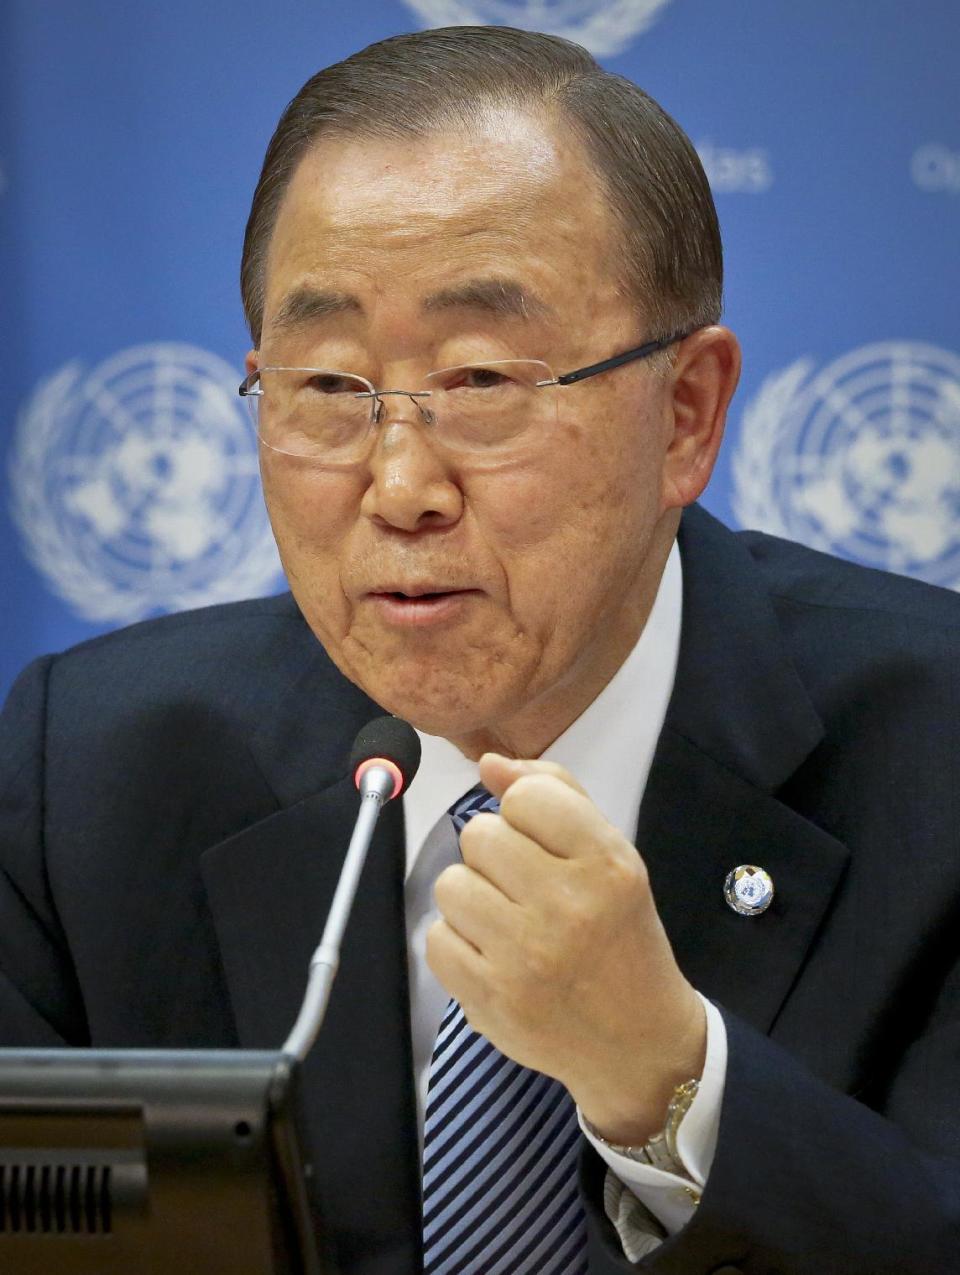 FILE - In this Friday, Dec. 16, 2016, file photo, United Nations Secretary-General Ban Ki-moon speaks during his final press conference at the U.N. headquarters. North Korea on Friday, Dec. 23, mocked the outgoing UN secretary-general over his apparent ambitions to run for South Korean president, calling him an opportunistic "chameleon in a human mask" who's dreaming a "hollow dream." (AP Photo/Bebeto Matthews, File)